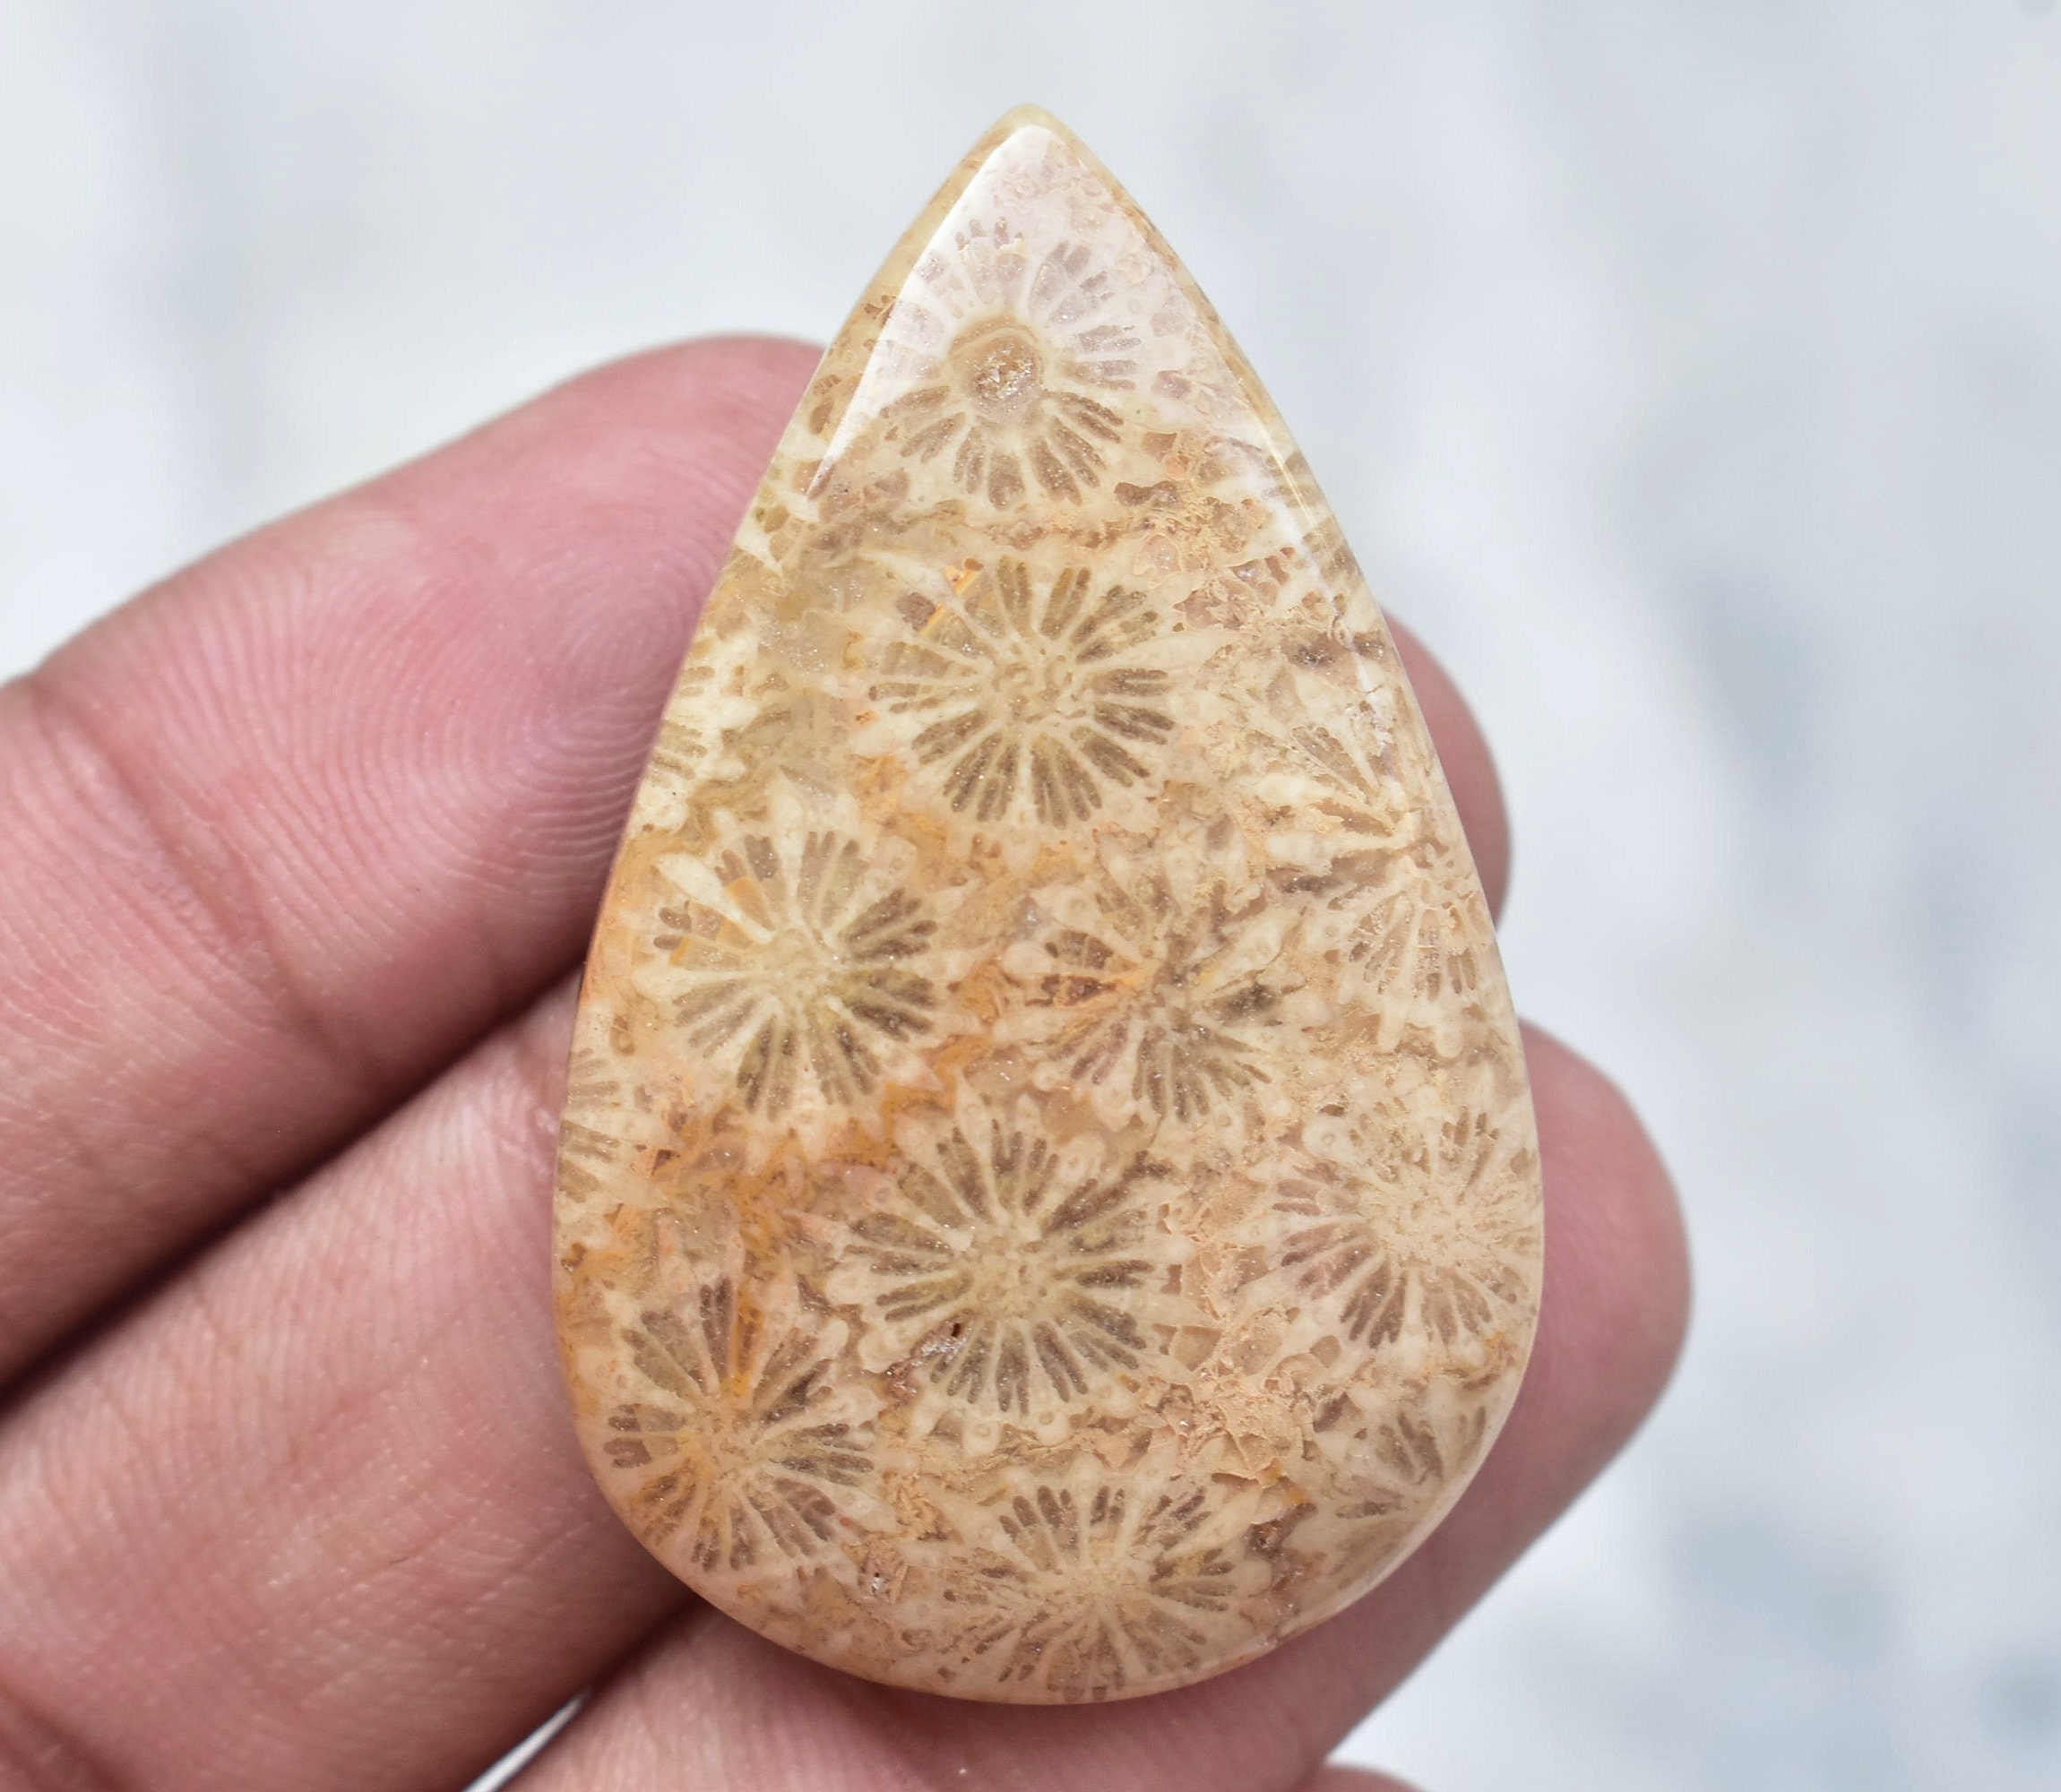 35 Carat Fossil Coral Cabochon Round Shape 28X4 MM Natural Brown Fossil Coral Cabochon Designer Rare Fossil Coral Gemstone For Jewelry G4170